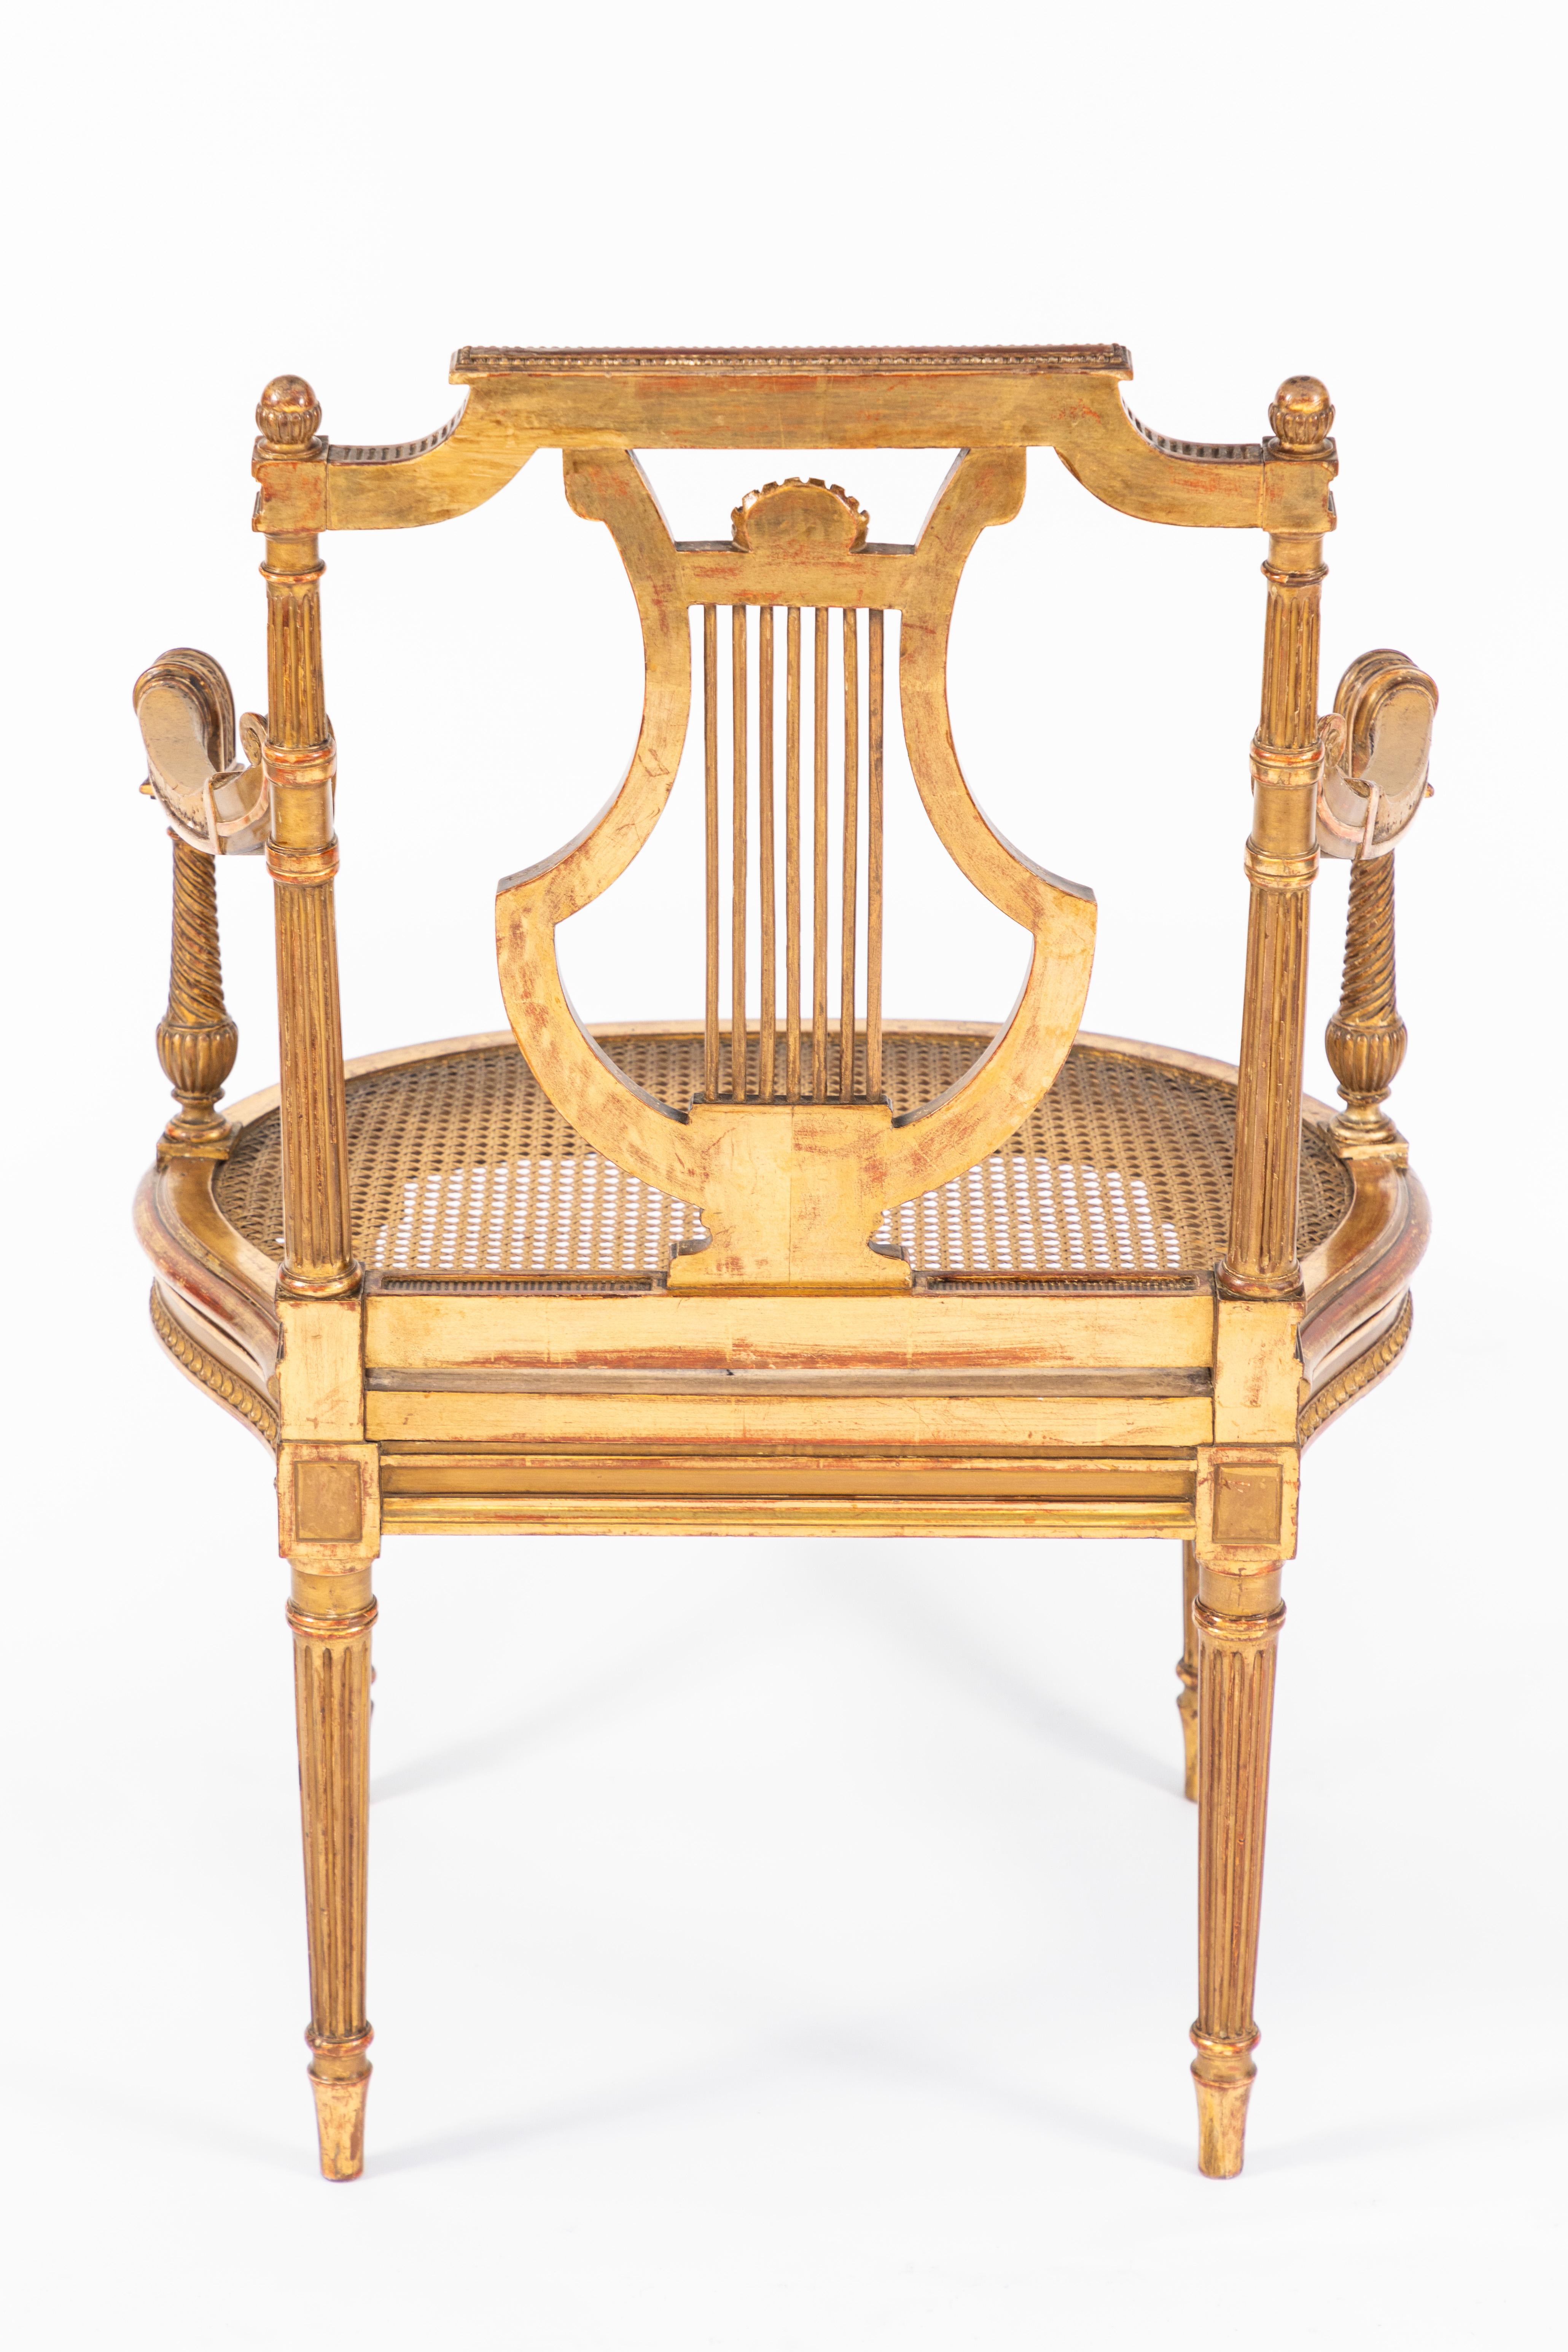 19th Century French Giltwood Single Open Arm Chair For Sale 2